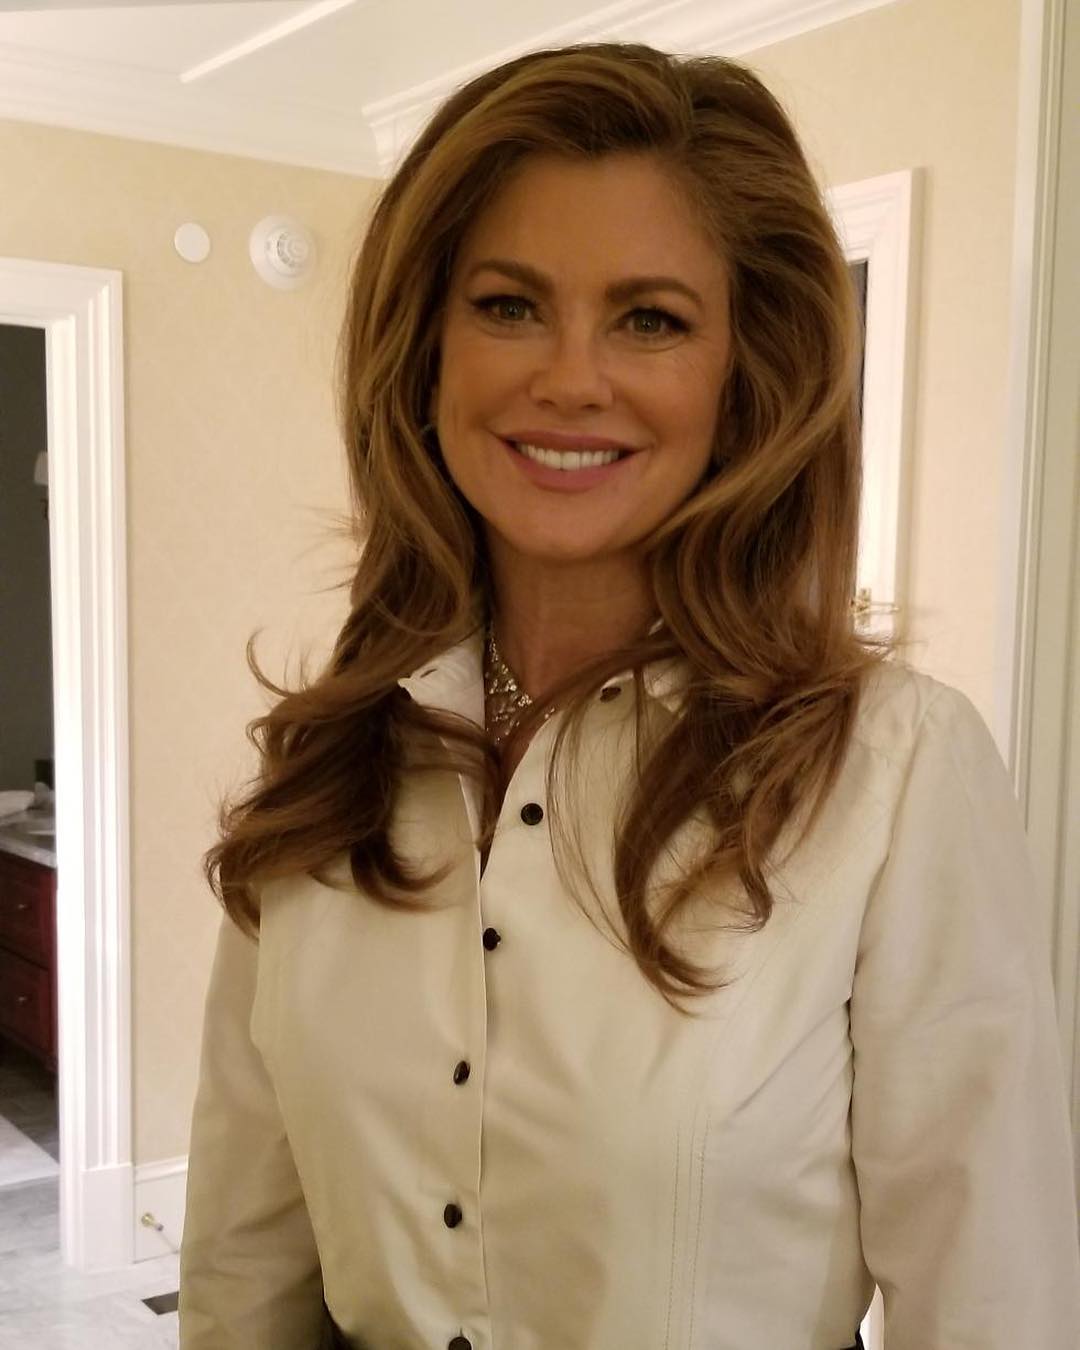 65+ Hot Pictures Of Kathy Ireland Which Will Make You Drool For Her | Best Of Comic Books